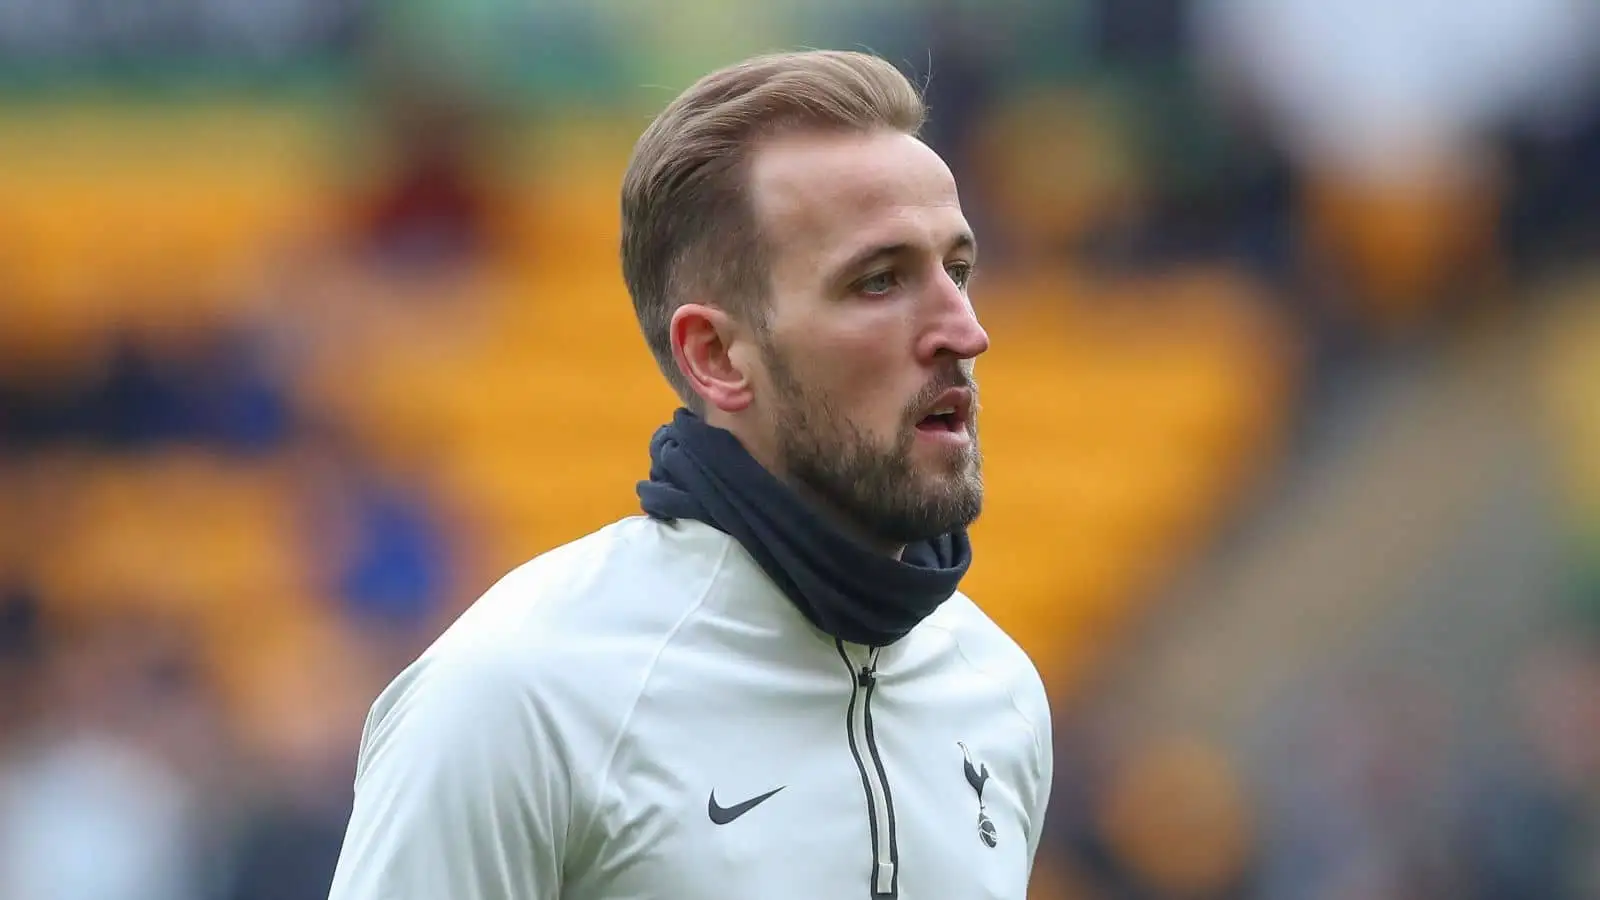 Harry Kane Number 10 of Tottenham Hotspur during the pre-game warm up ahead of the Premier League match Wolverhampton Wanderers vs Tottenham Hotspur at Molineux, Wolverhampton